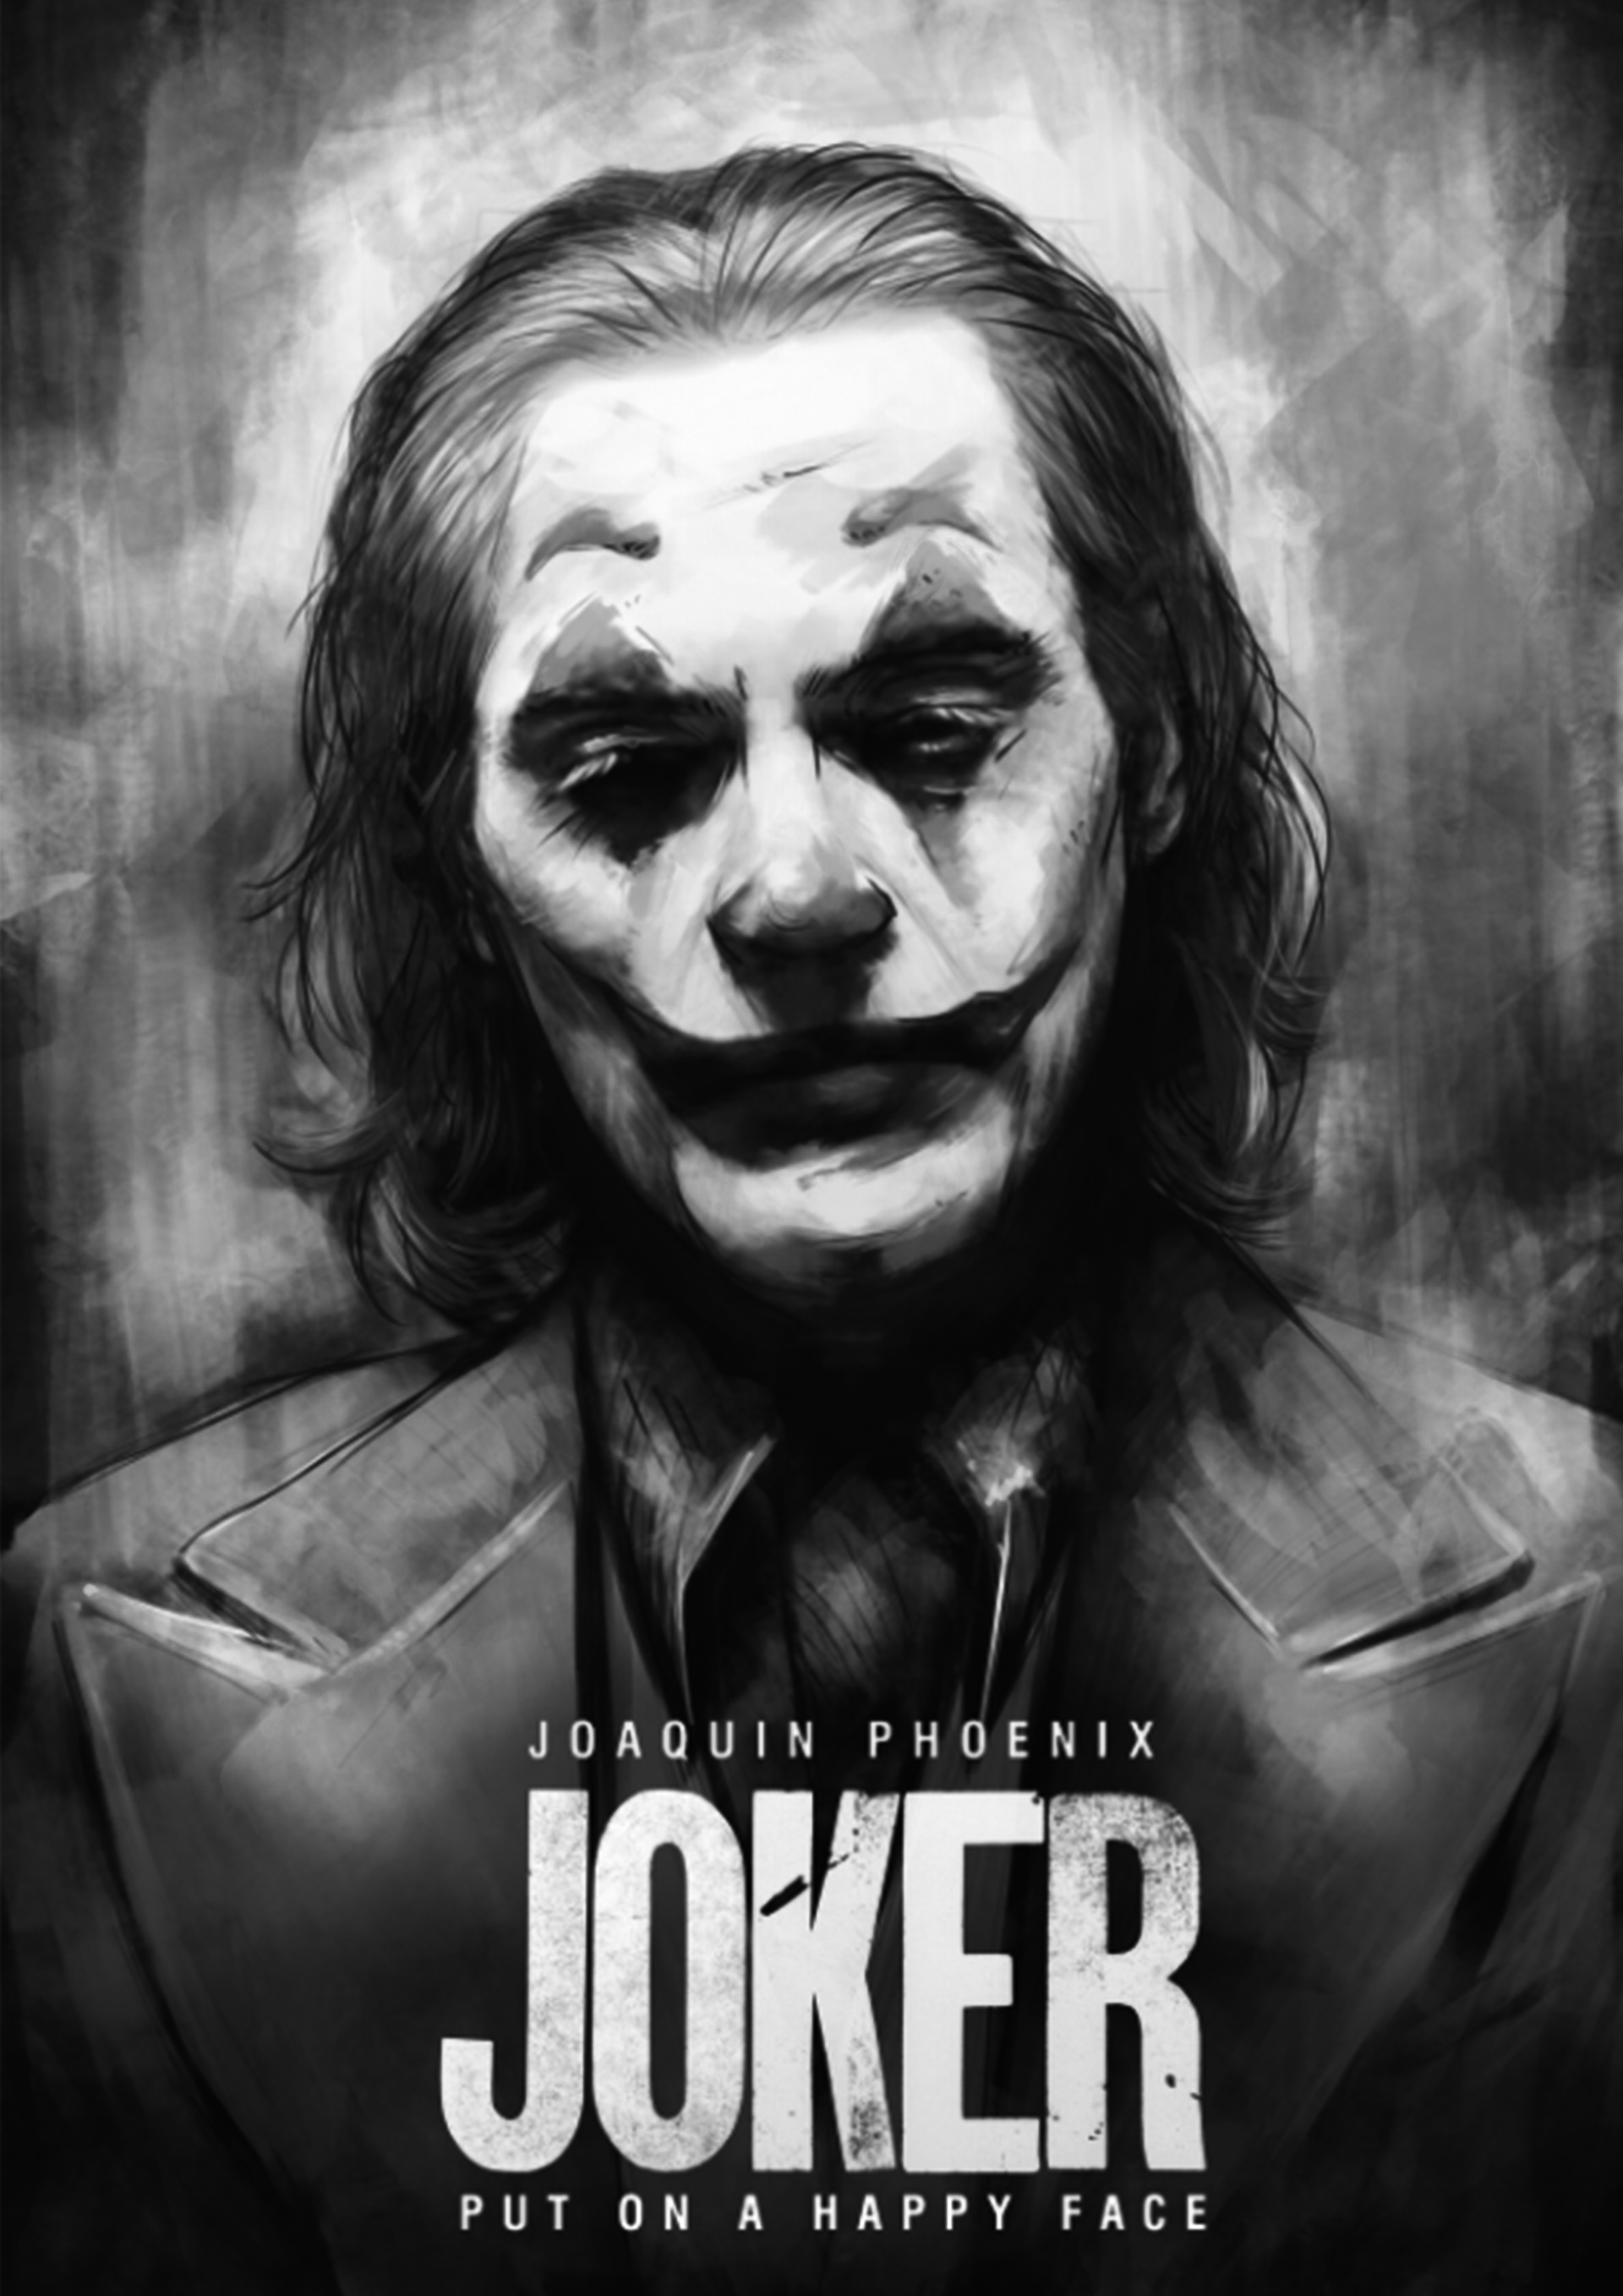 ArtStation - two variations of a joker submission for a contest